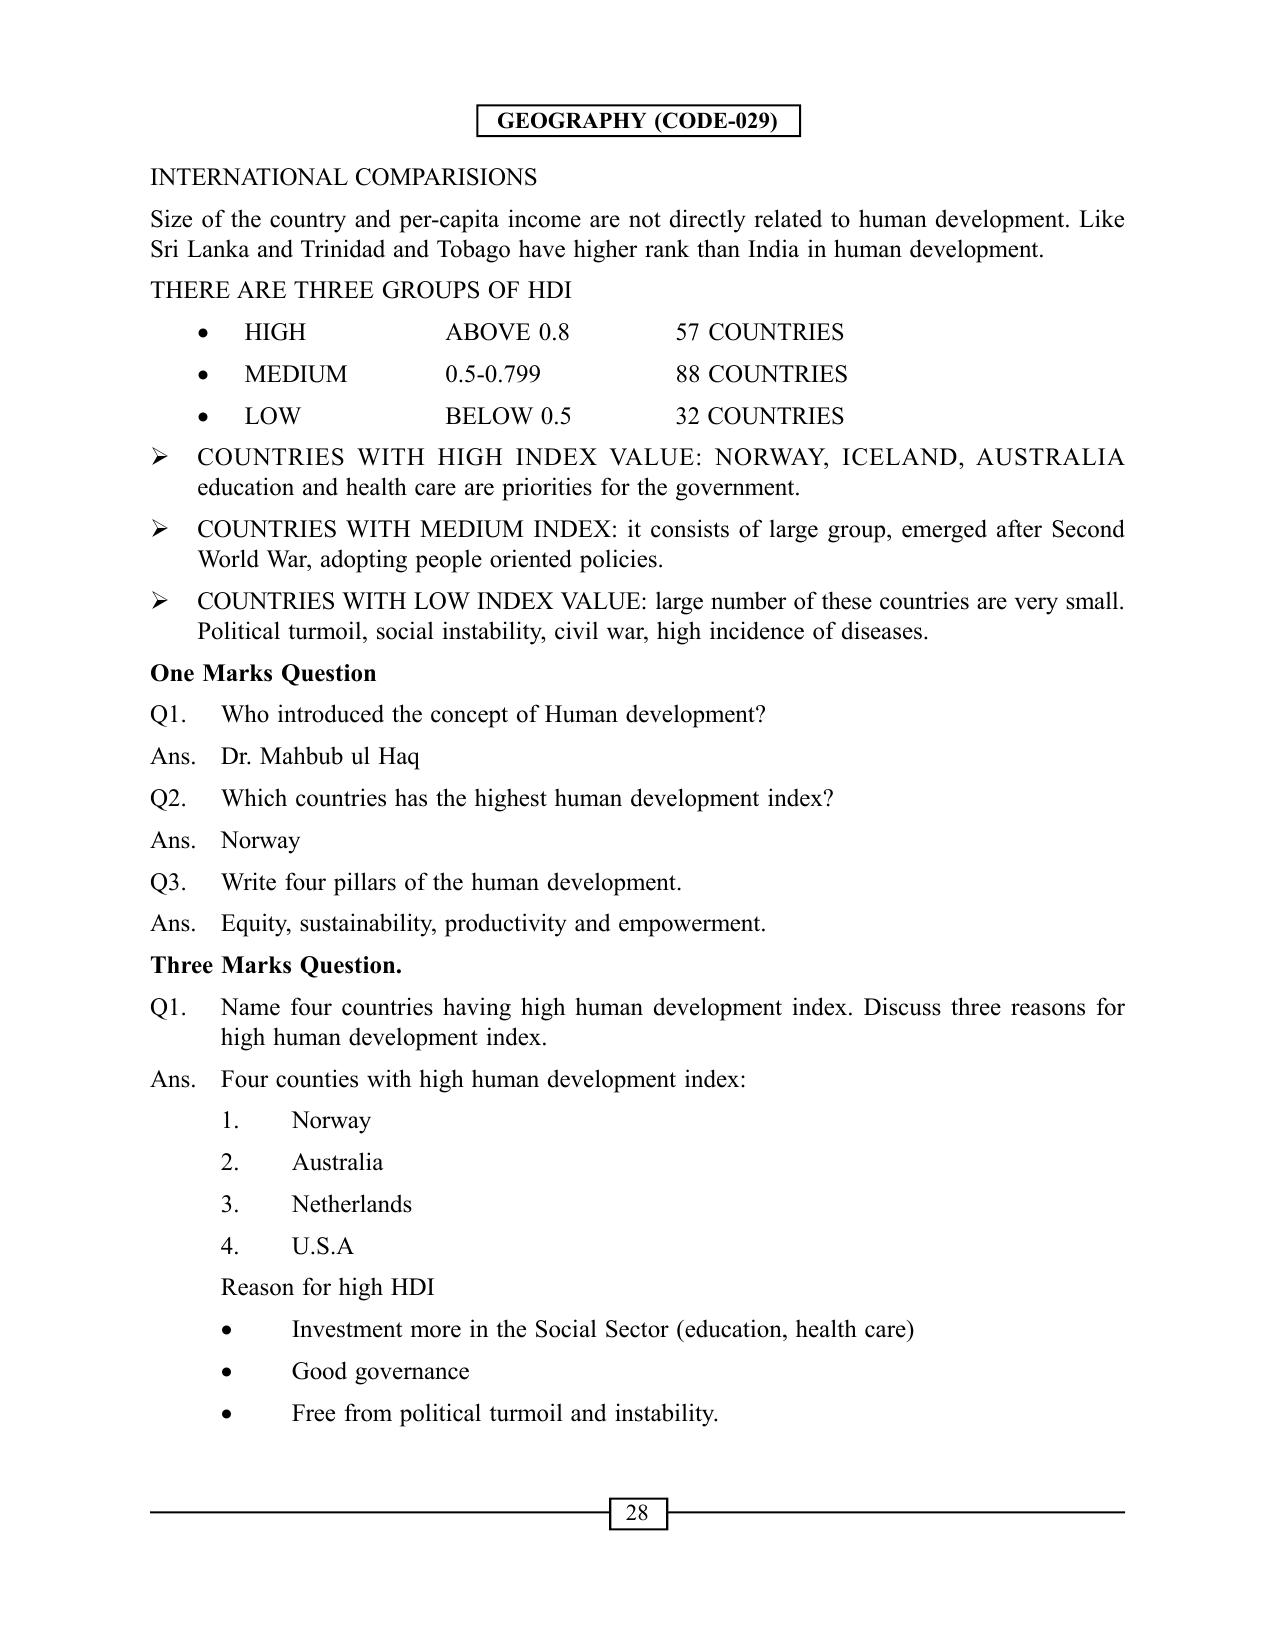 CBSE Worksheets for Class 12 Geography Human Development - Page 2